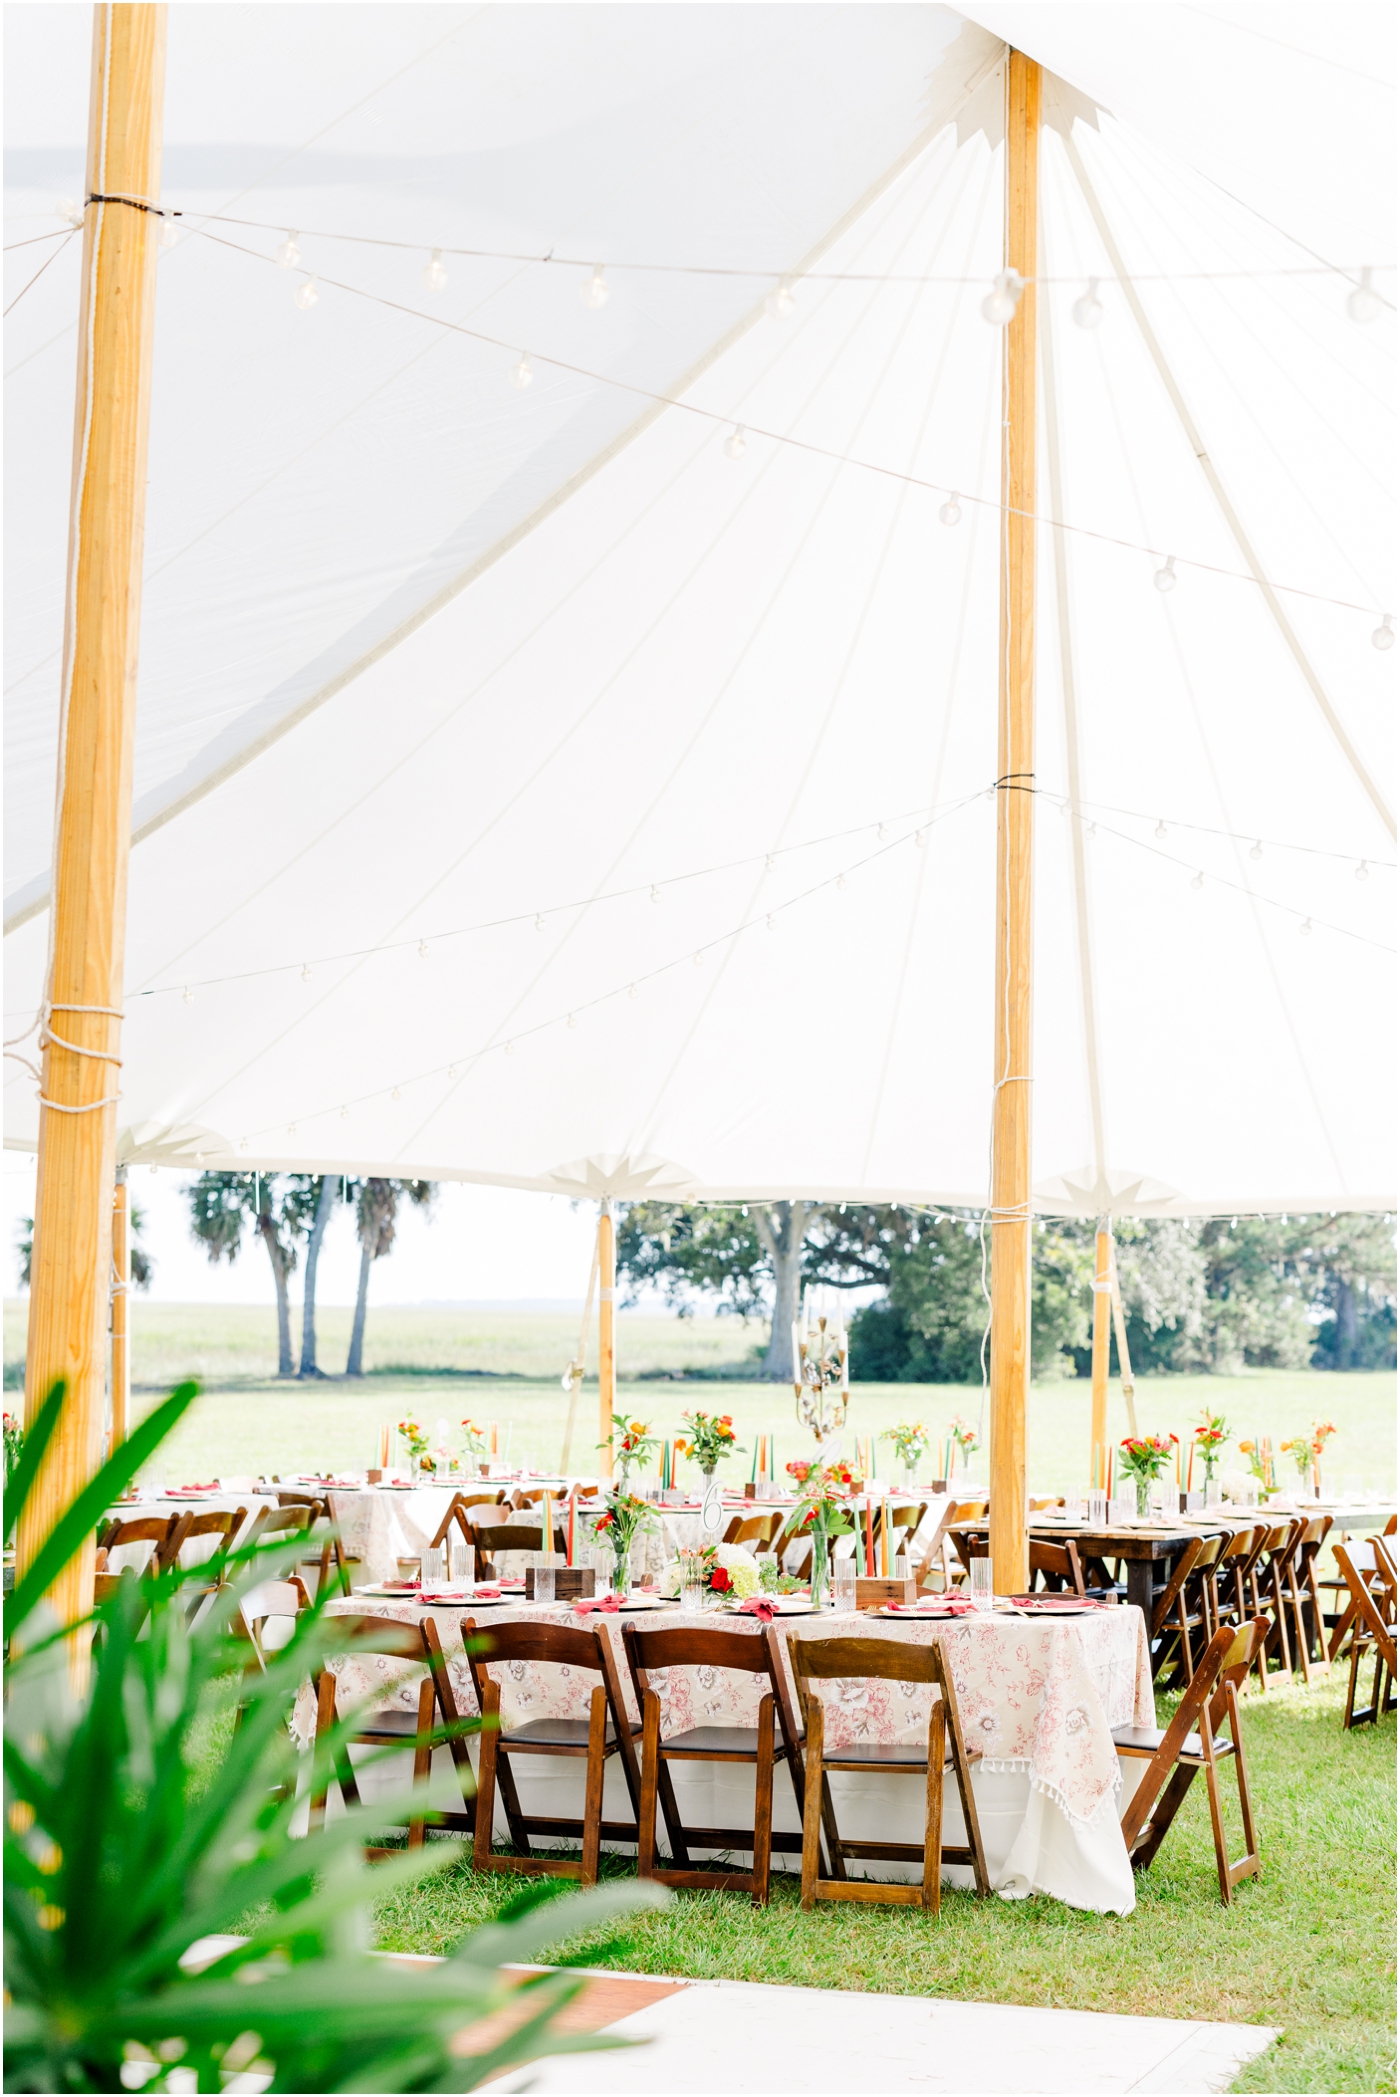 Sailcloth tent reception at an Agapae Oaks wedding in Beaufort, SC